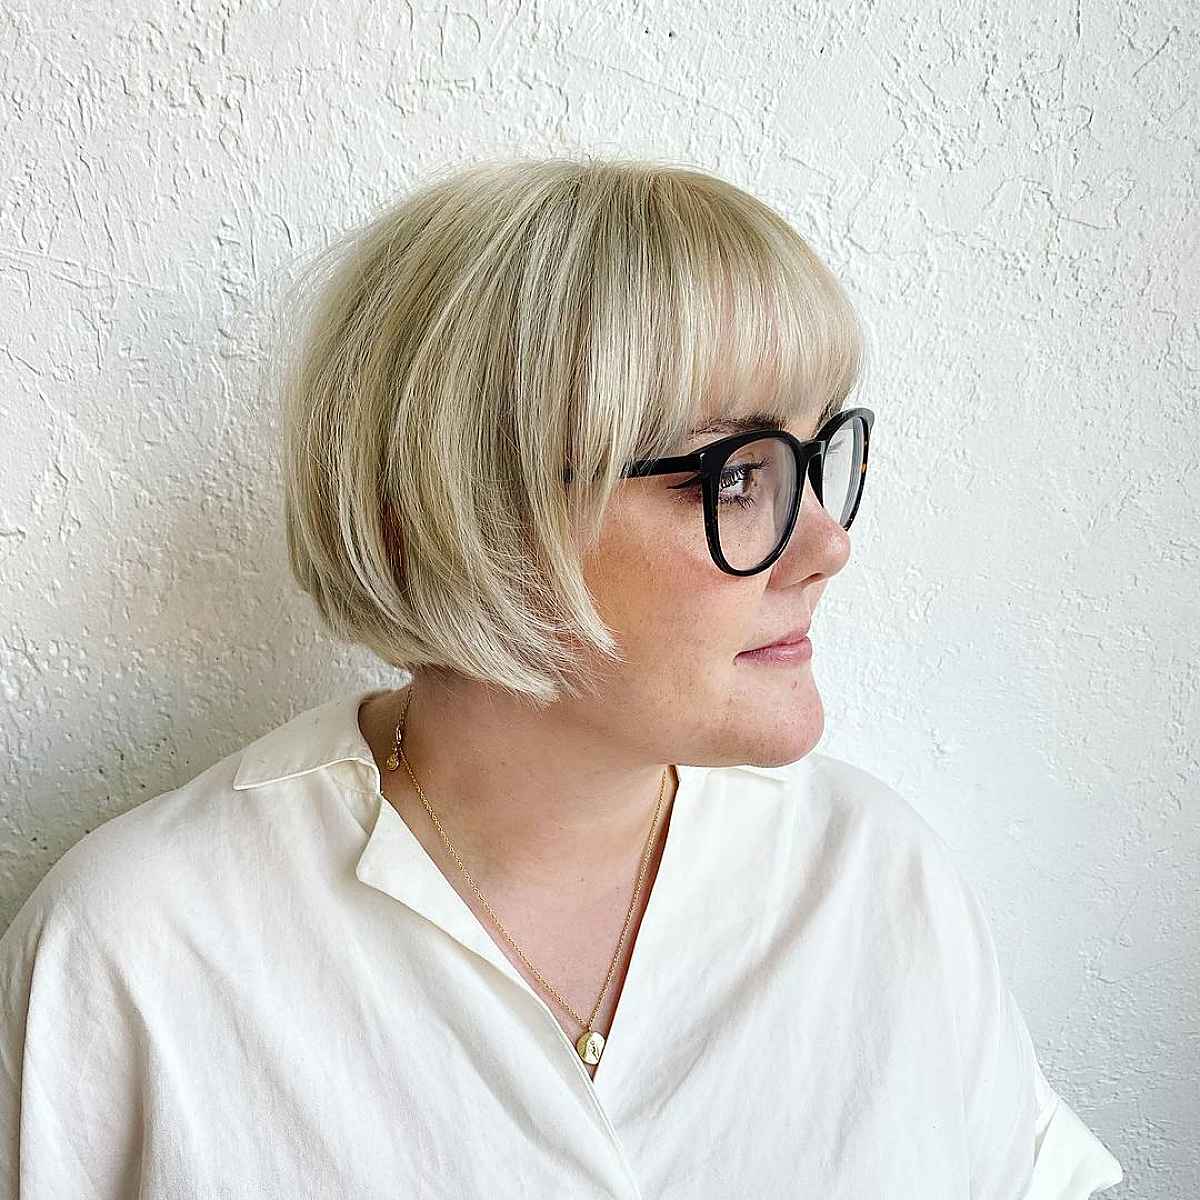 Straight Bob with Bangs and Glasses